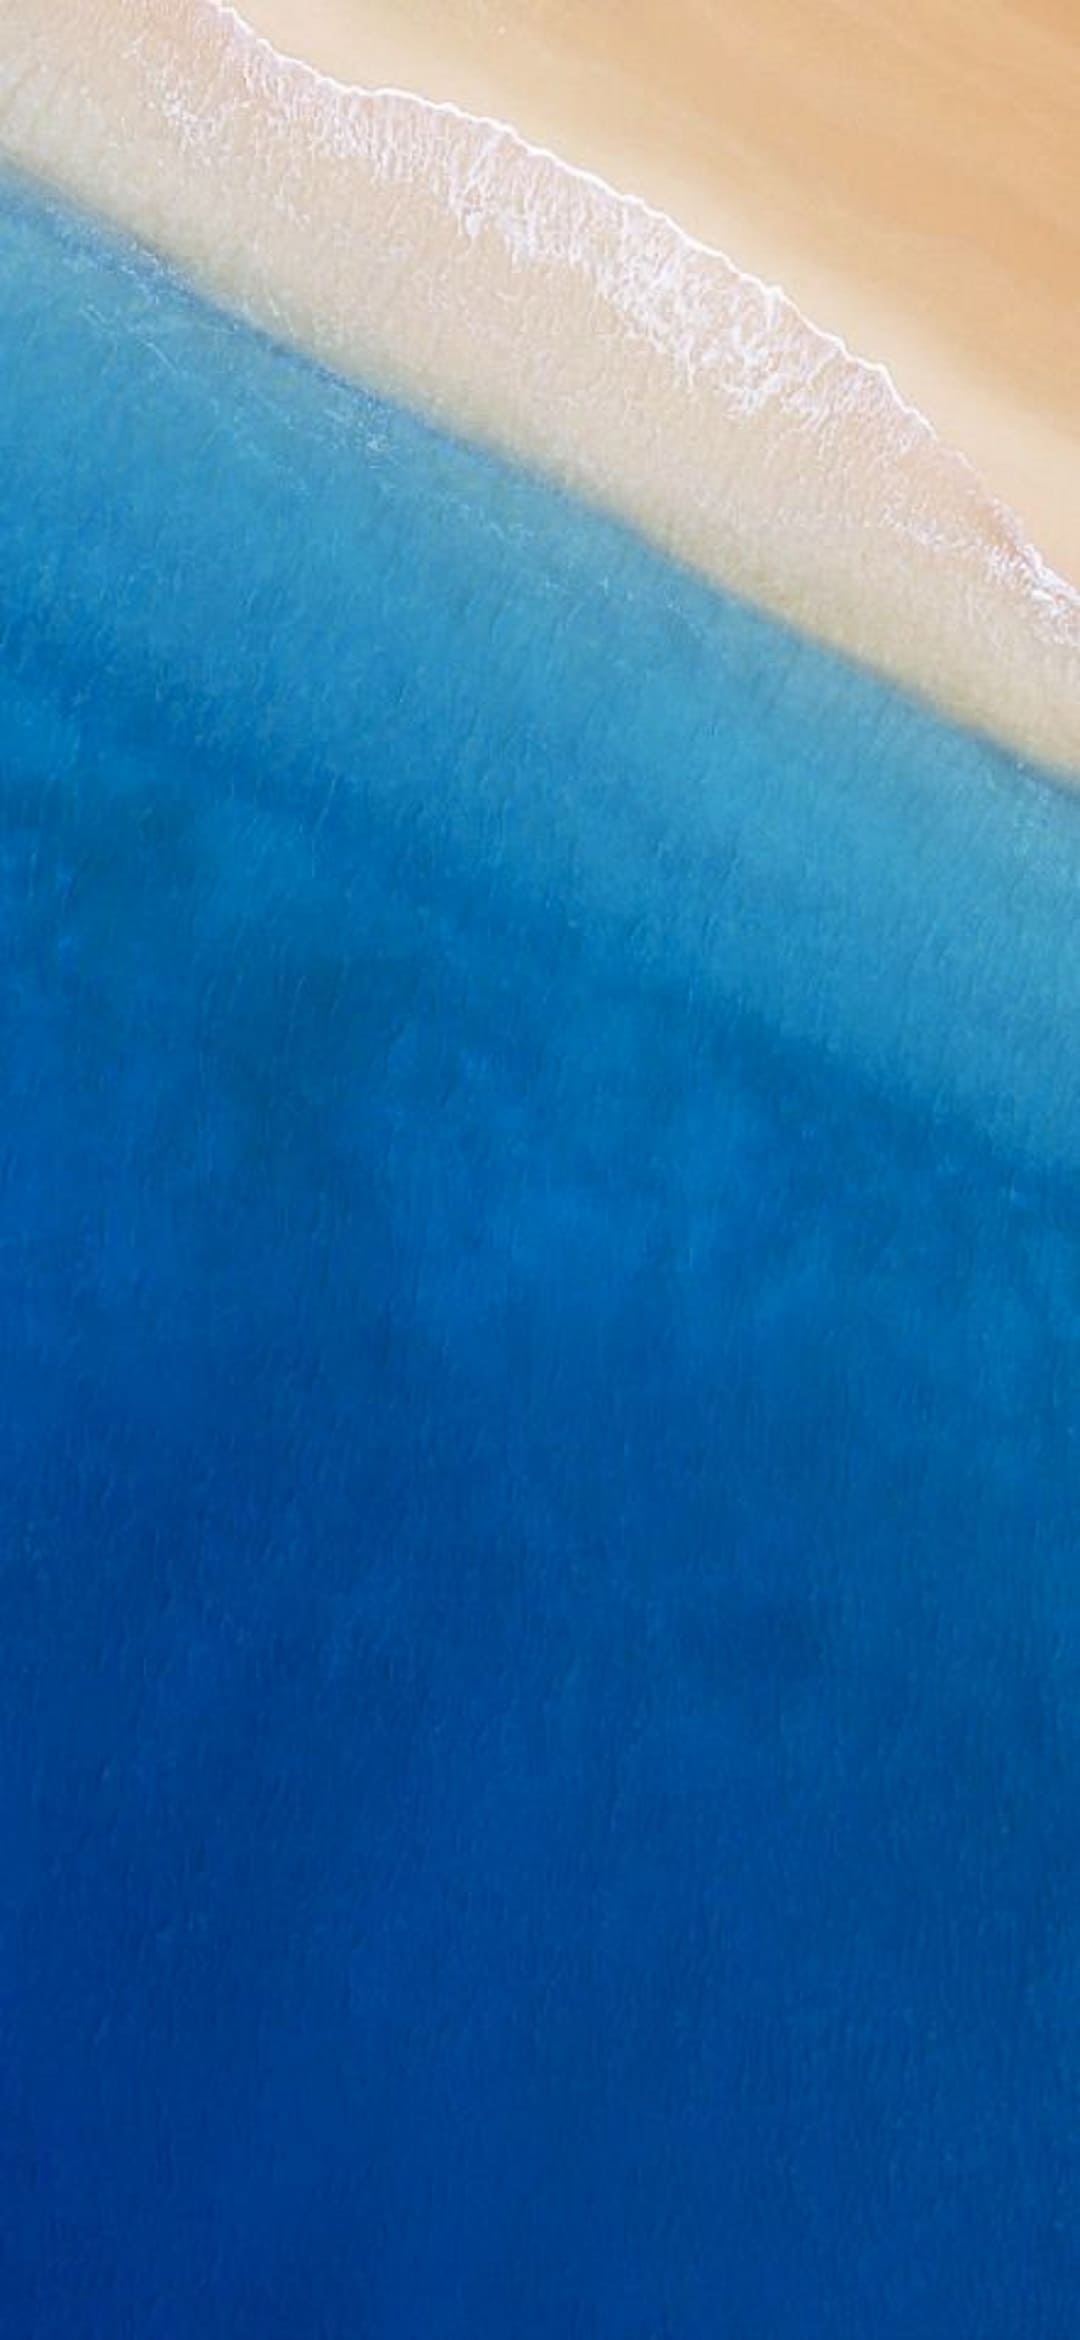 wallpaper of oppo,blue,water,turquoise,aqua,sky